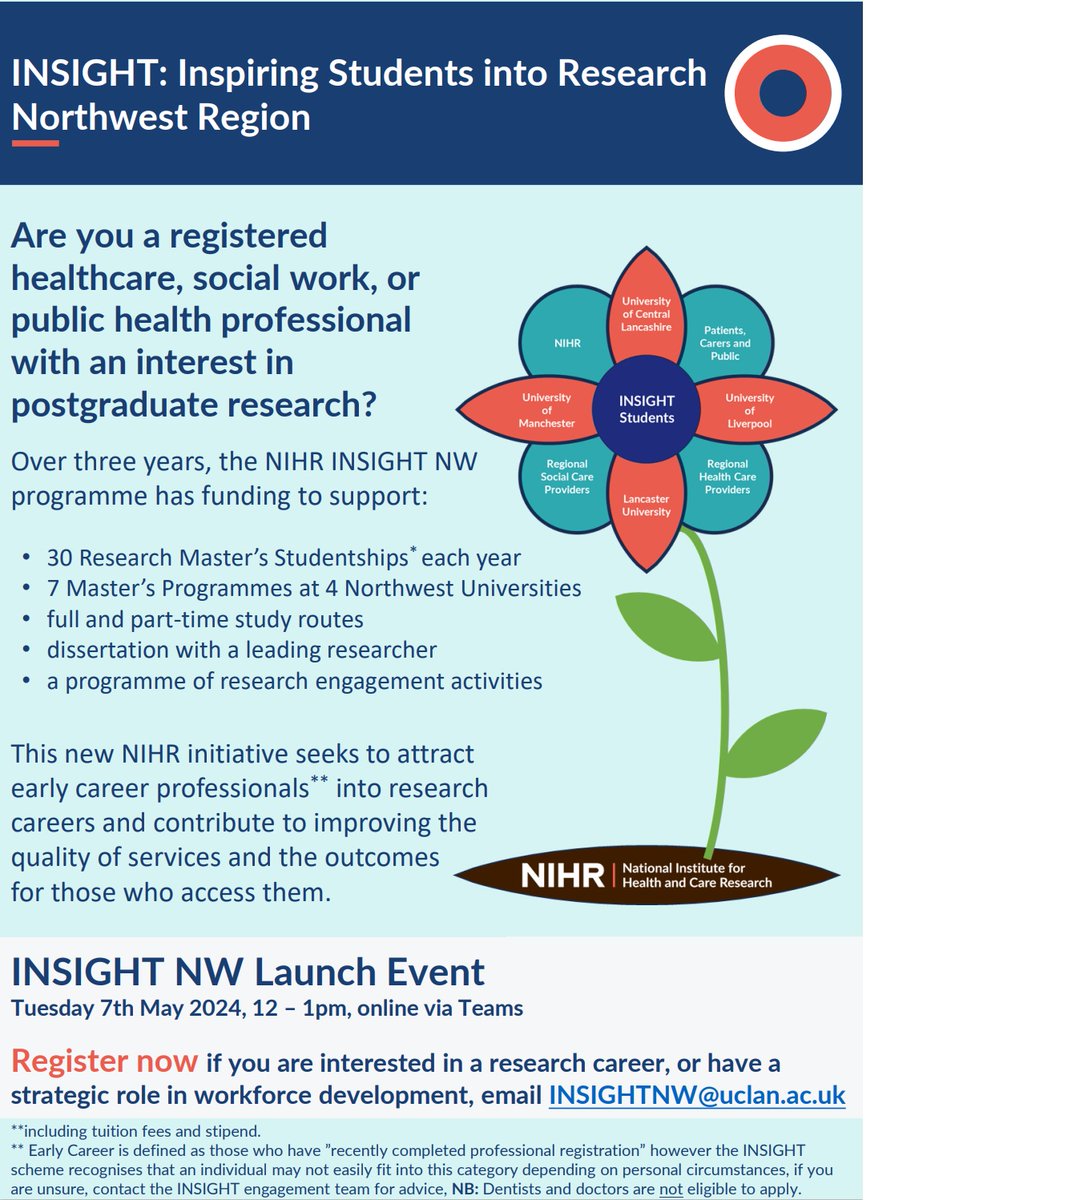 Registered health/social care professional, recently qualified, interested in research in the North West? 

Why not attend the launch event INSIGHT North West, Tuesday 7th May 2024, 12-1pm. 

Funding of up to 30 funded Masters Studentships per year. Register INSIGHTNW@uclan.ac.uk